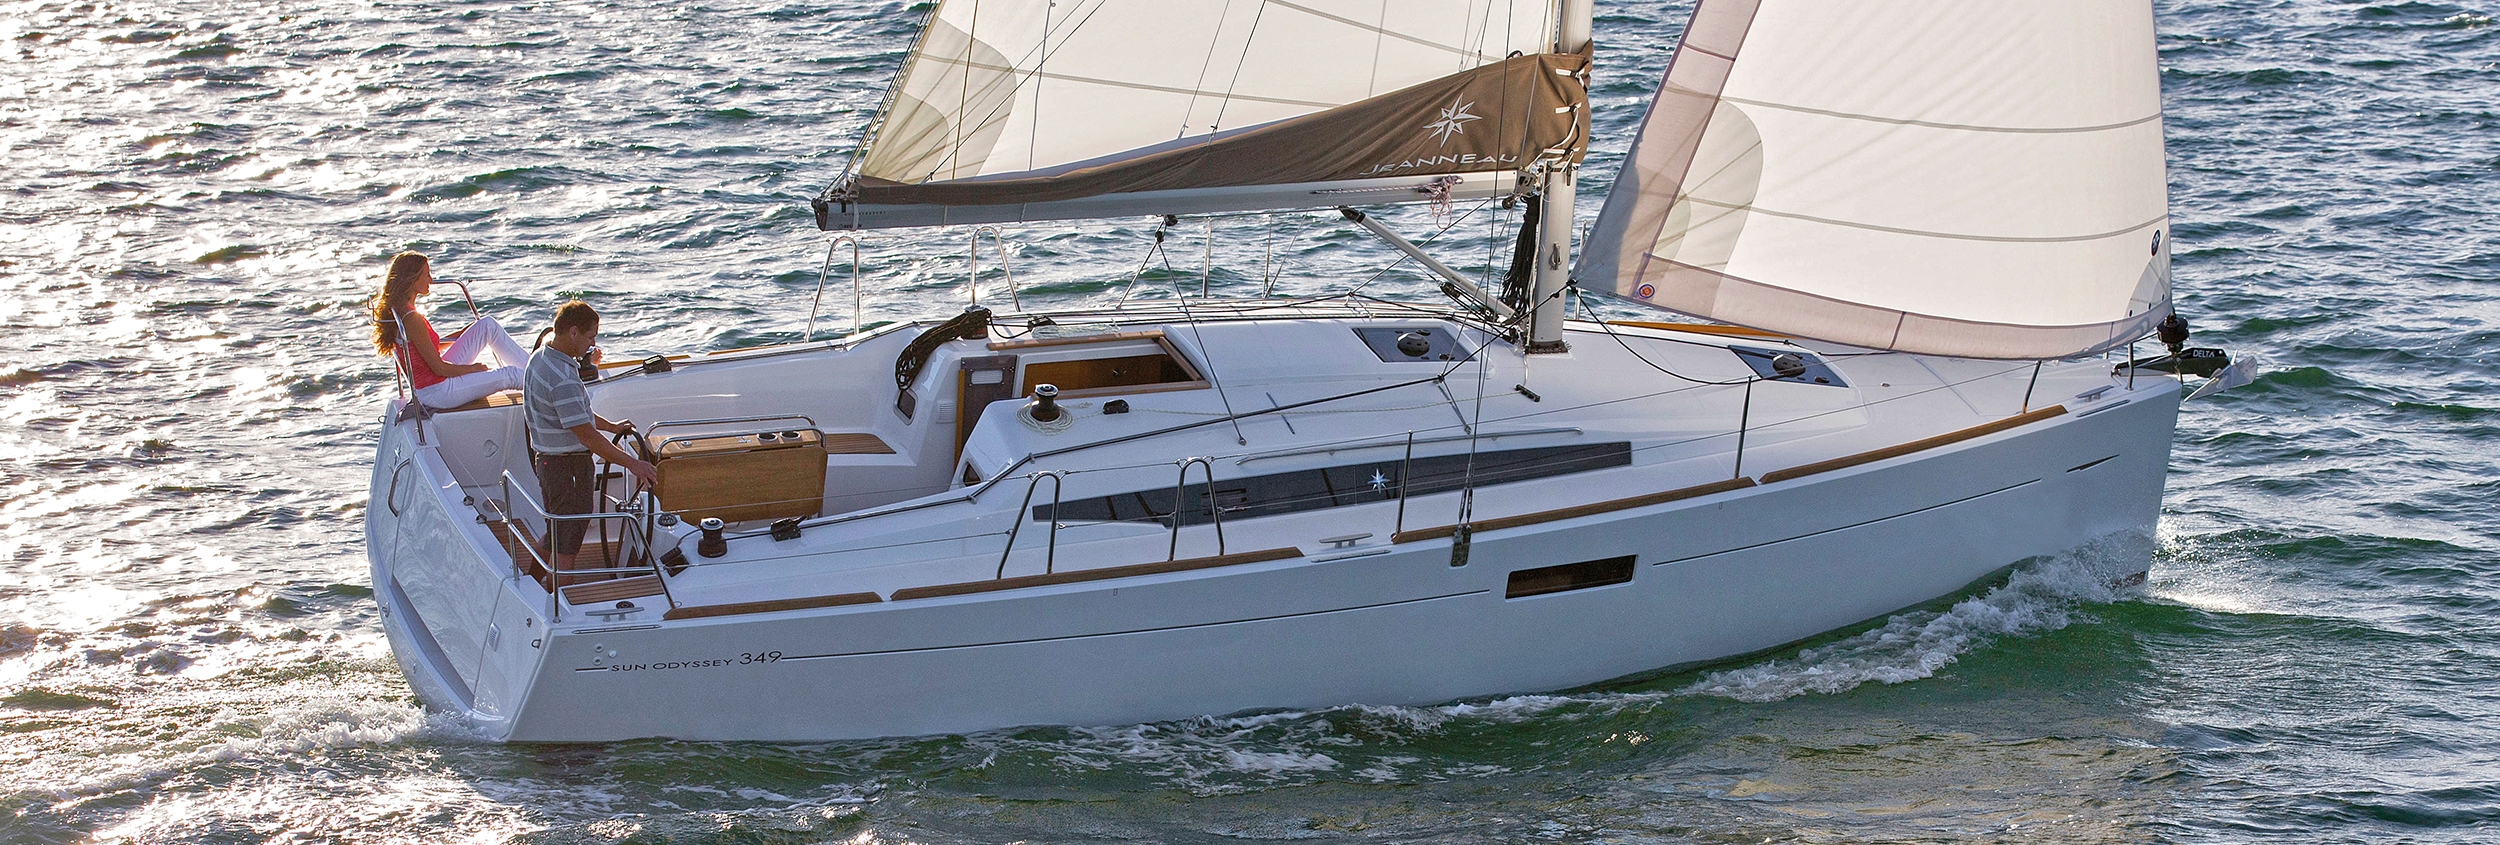 Jeanneau Sun Odyssey 349 by Trend Travel Yachting